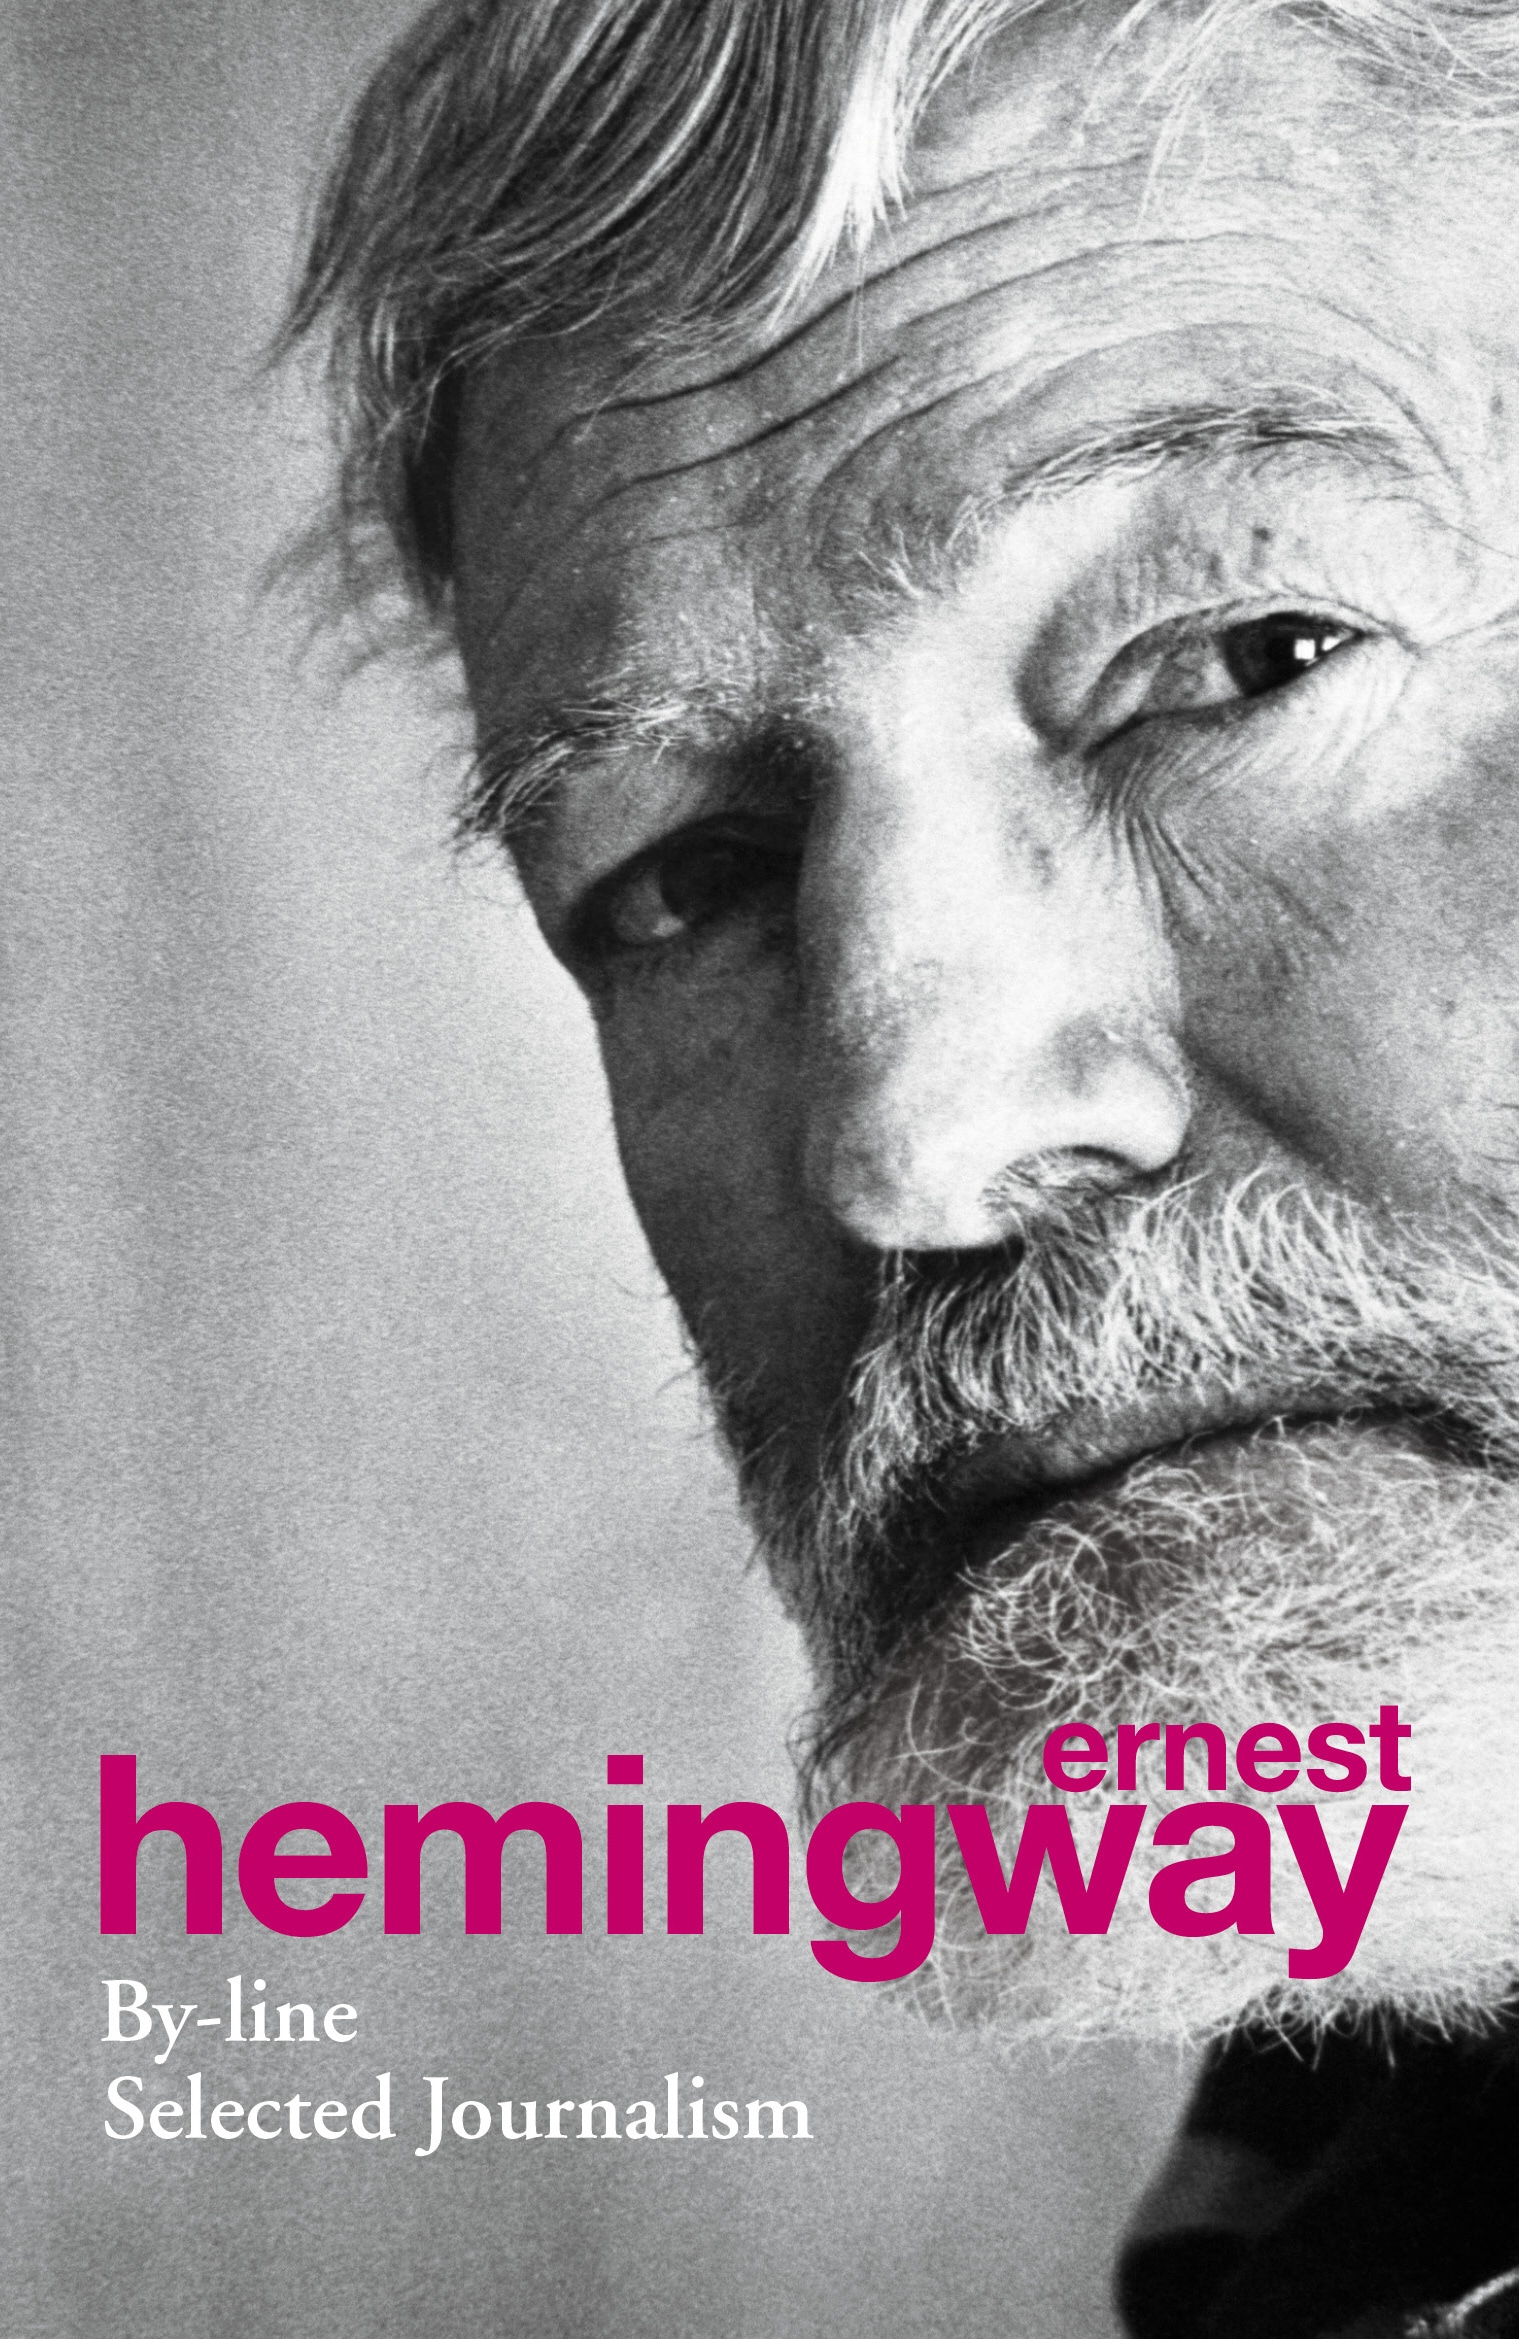 Book “By-Line” by Ernest Hemingway — May 2, 2013